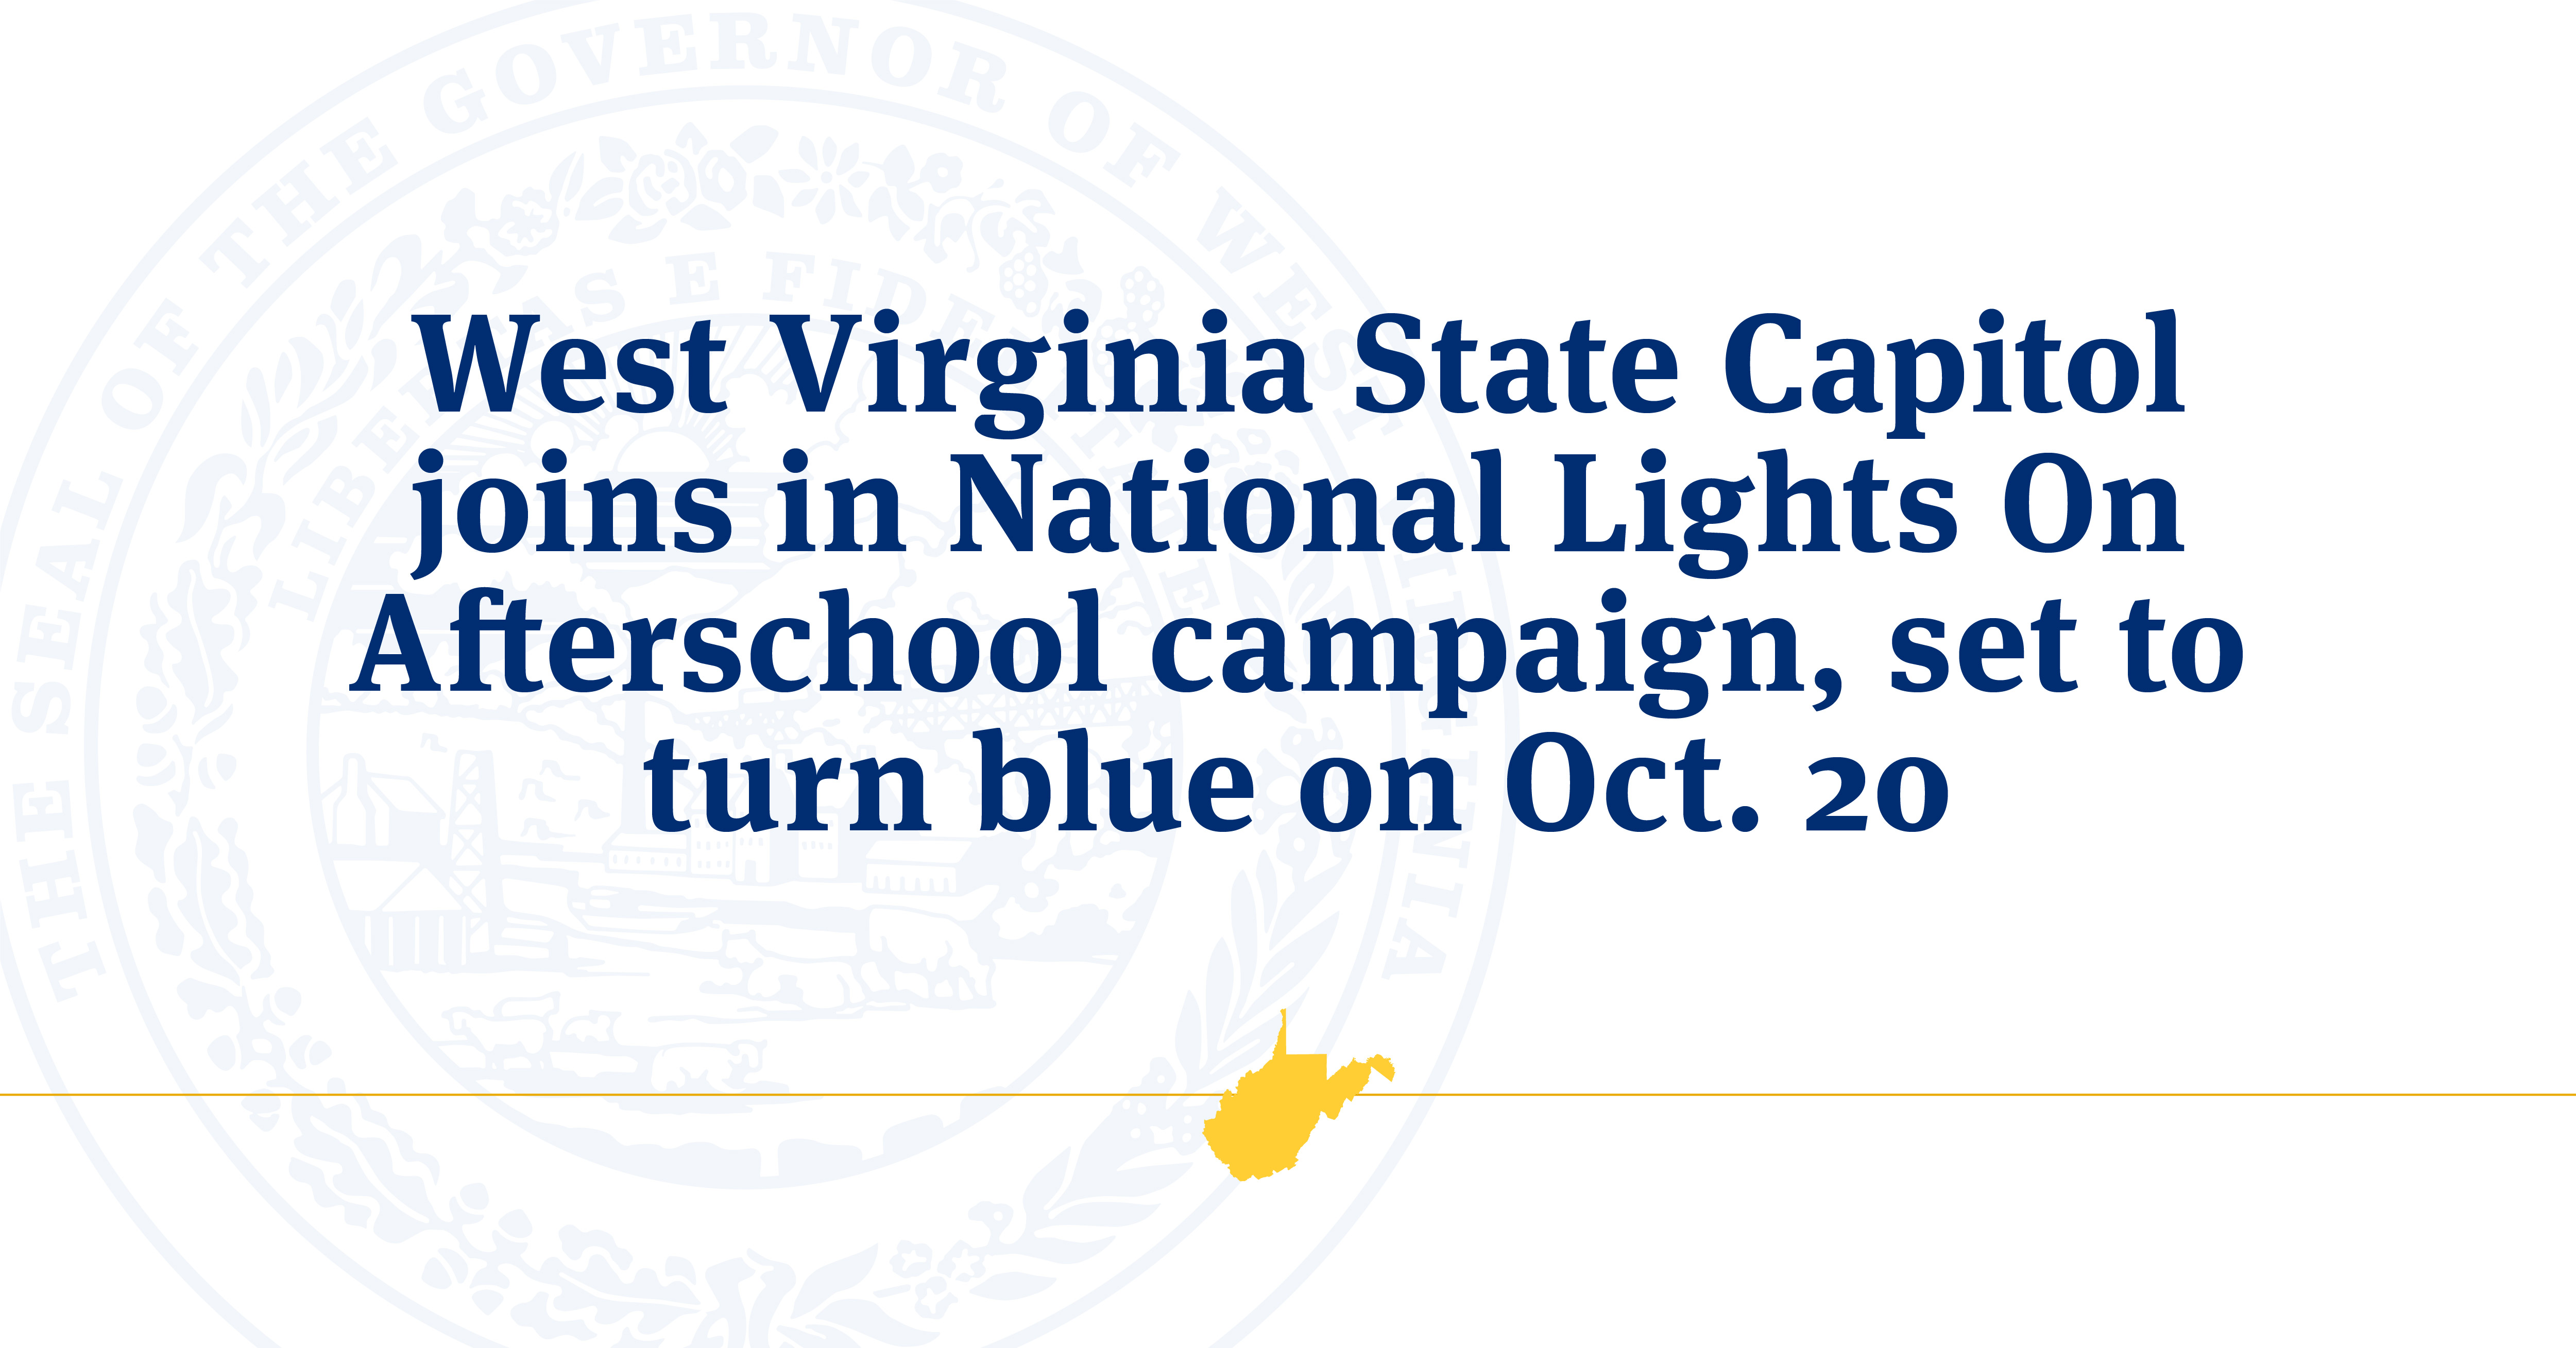 West Virginia State Capitol joins in National Lights On Afterschool campaign, set to turn blue on Oct. 20